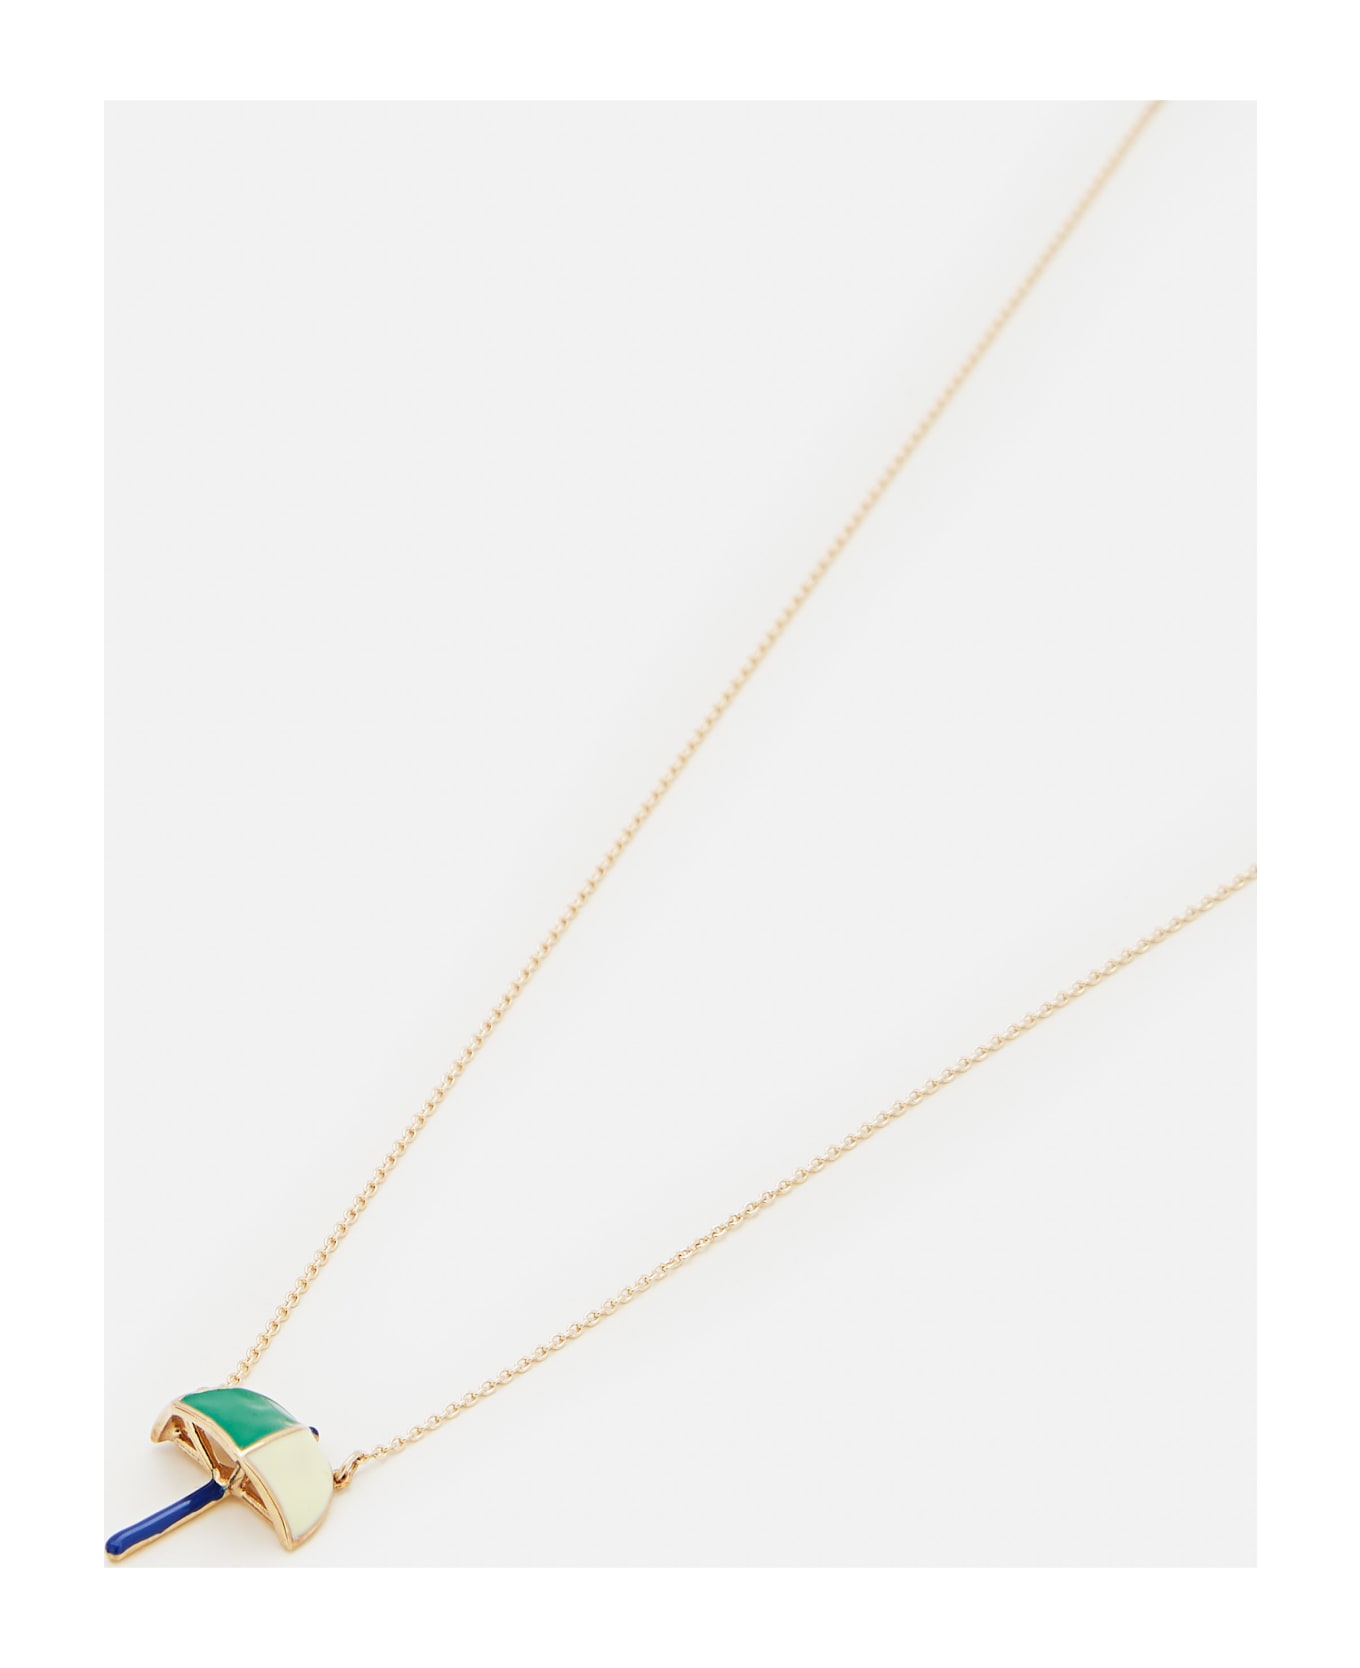 Aliita 9k Gold Sombrilla Polished Necklace - Green ネックレス